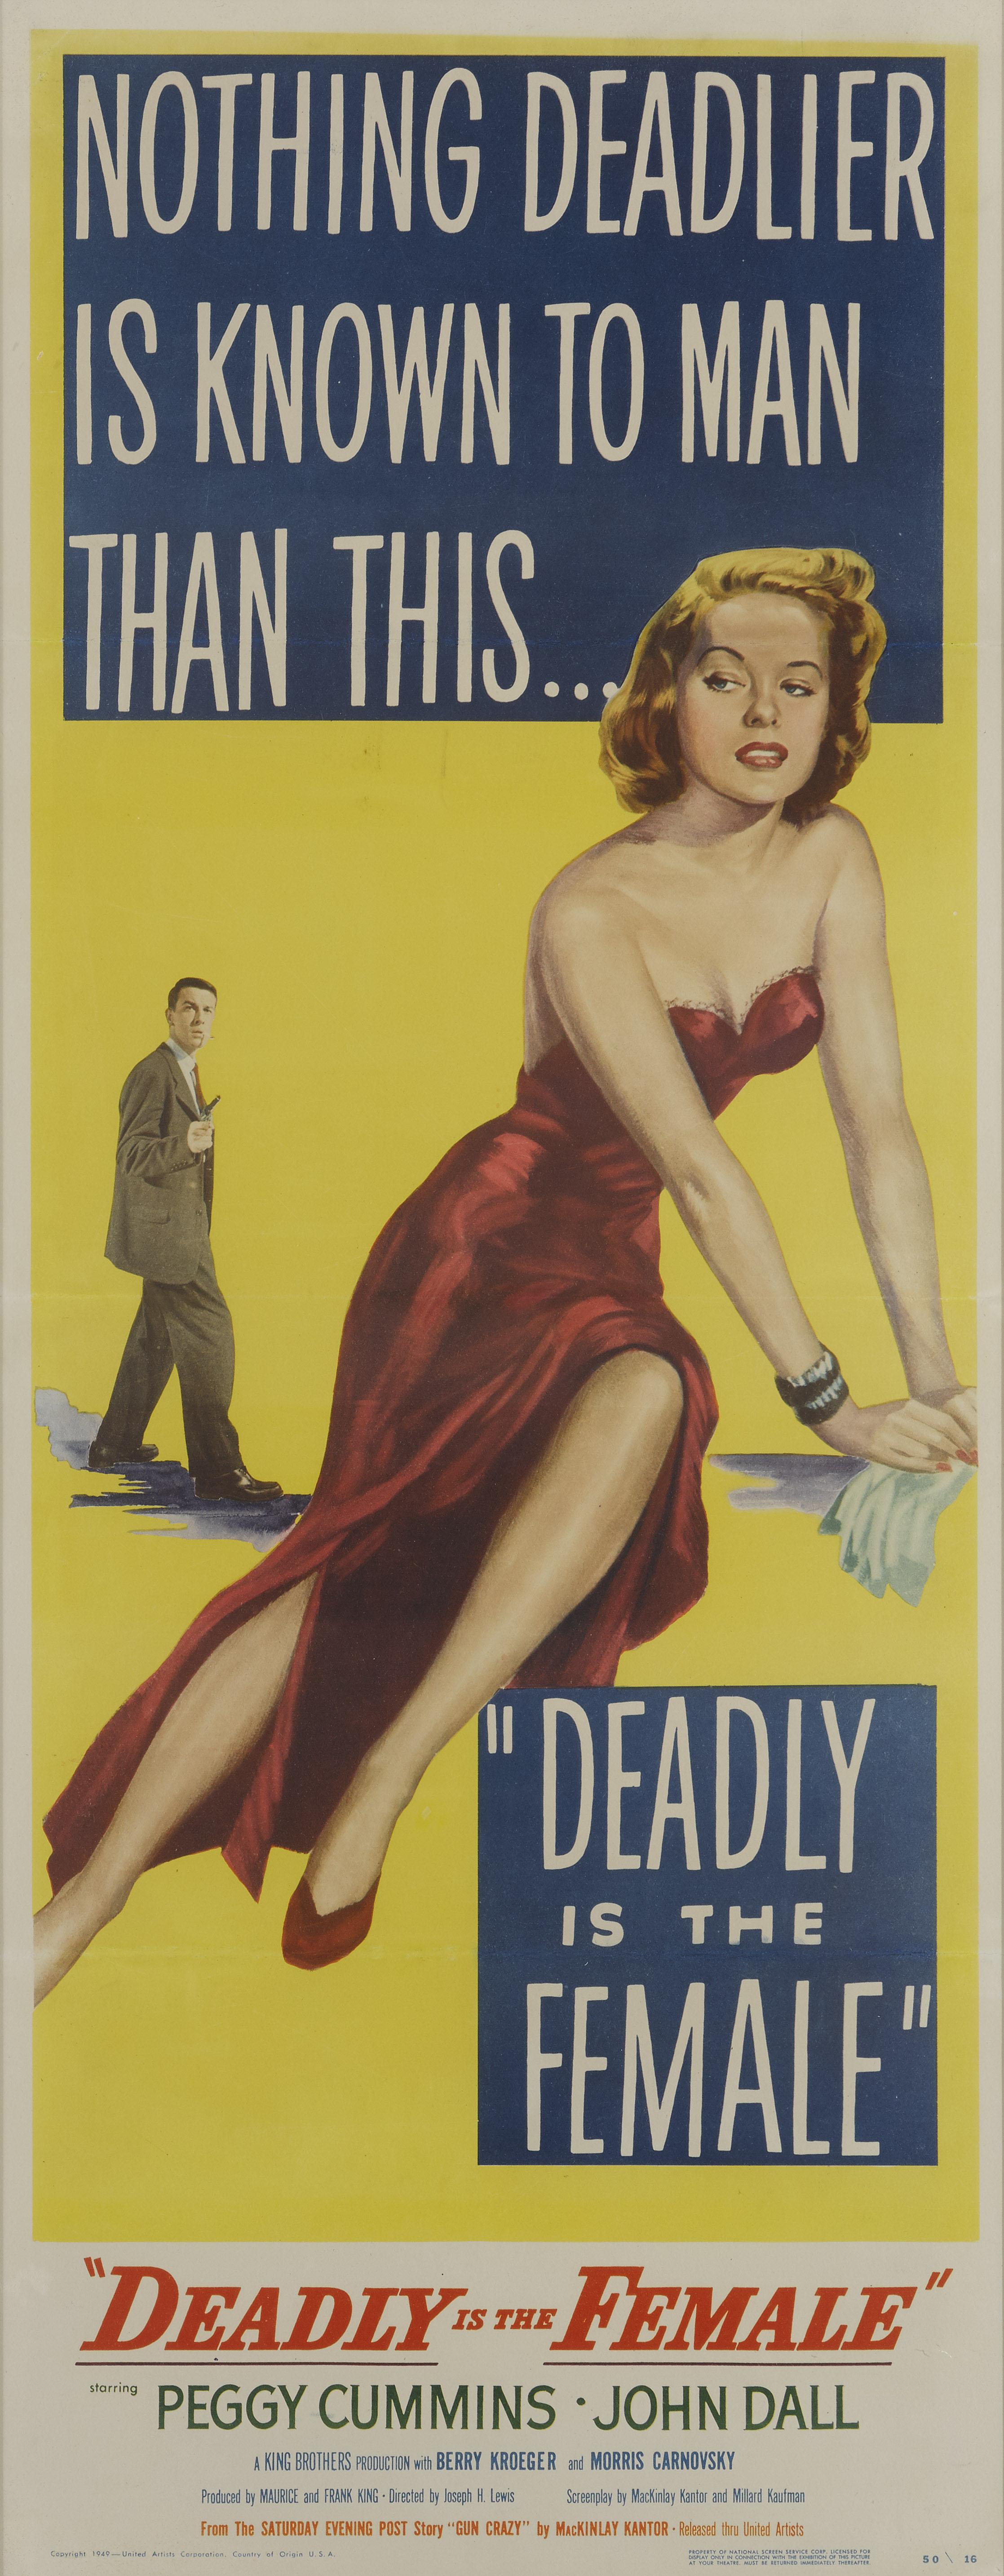 Original US film poster for the 1950 film Deadly is the Female.
This American film noir was directed by Joseph H. Lewis and stars Peggy Cummins and John Dall. It tells the story of a gun crazed husband and wife duo who go on a robbery spree. The